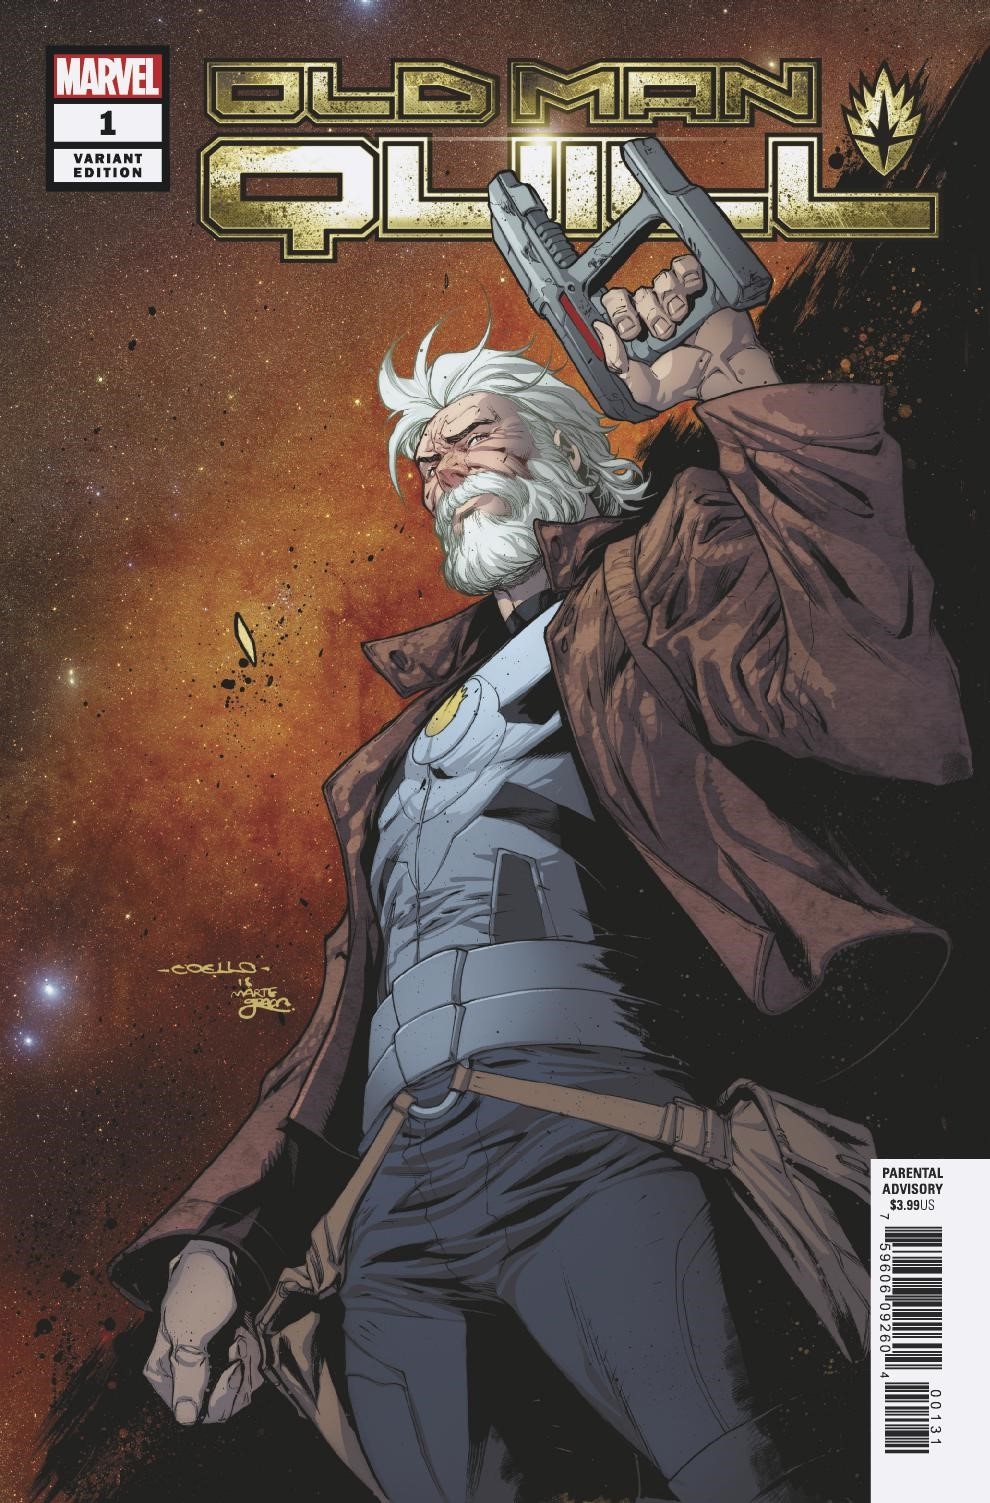 OLD MAN QUILL #1-8 (MARVEL/STARLORD/SACKS/0921100) COMPLETE SET LOT OF 8